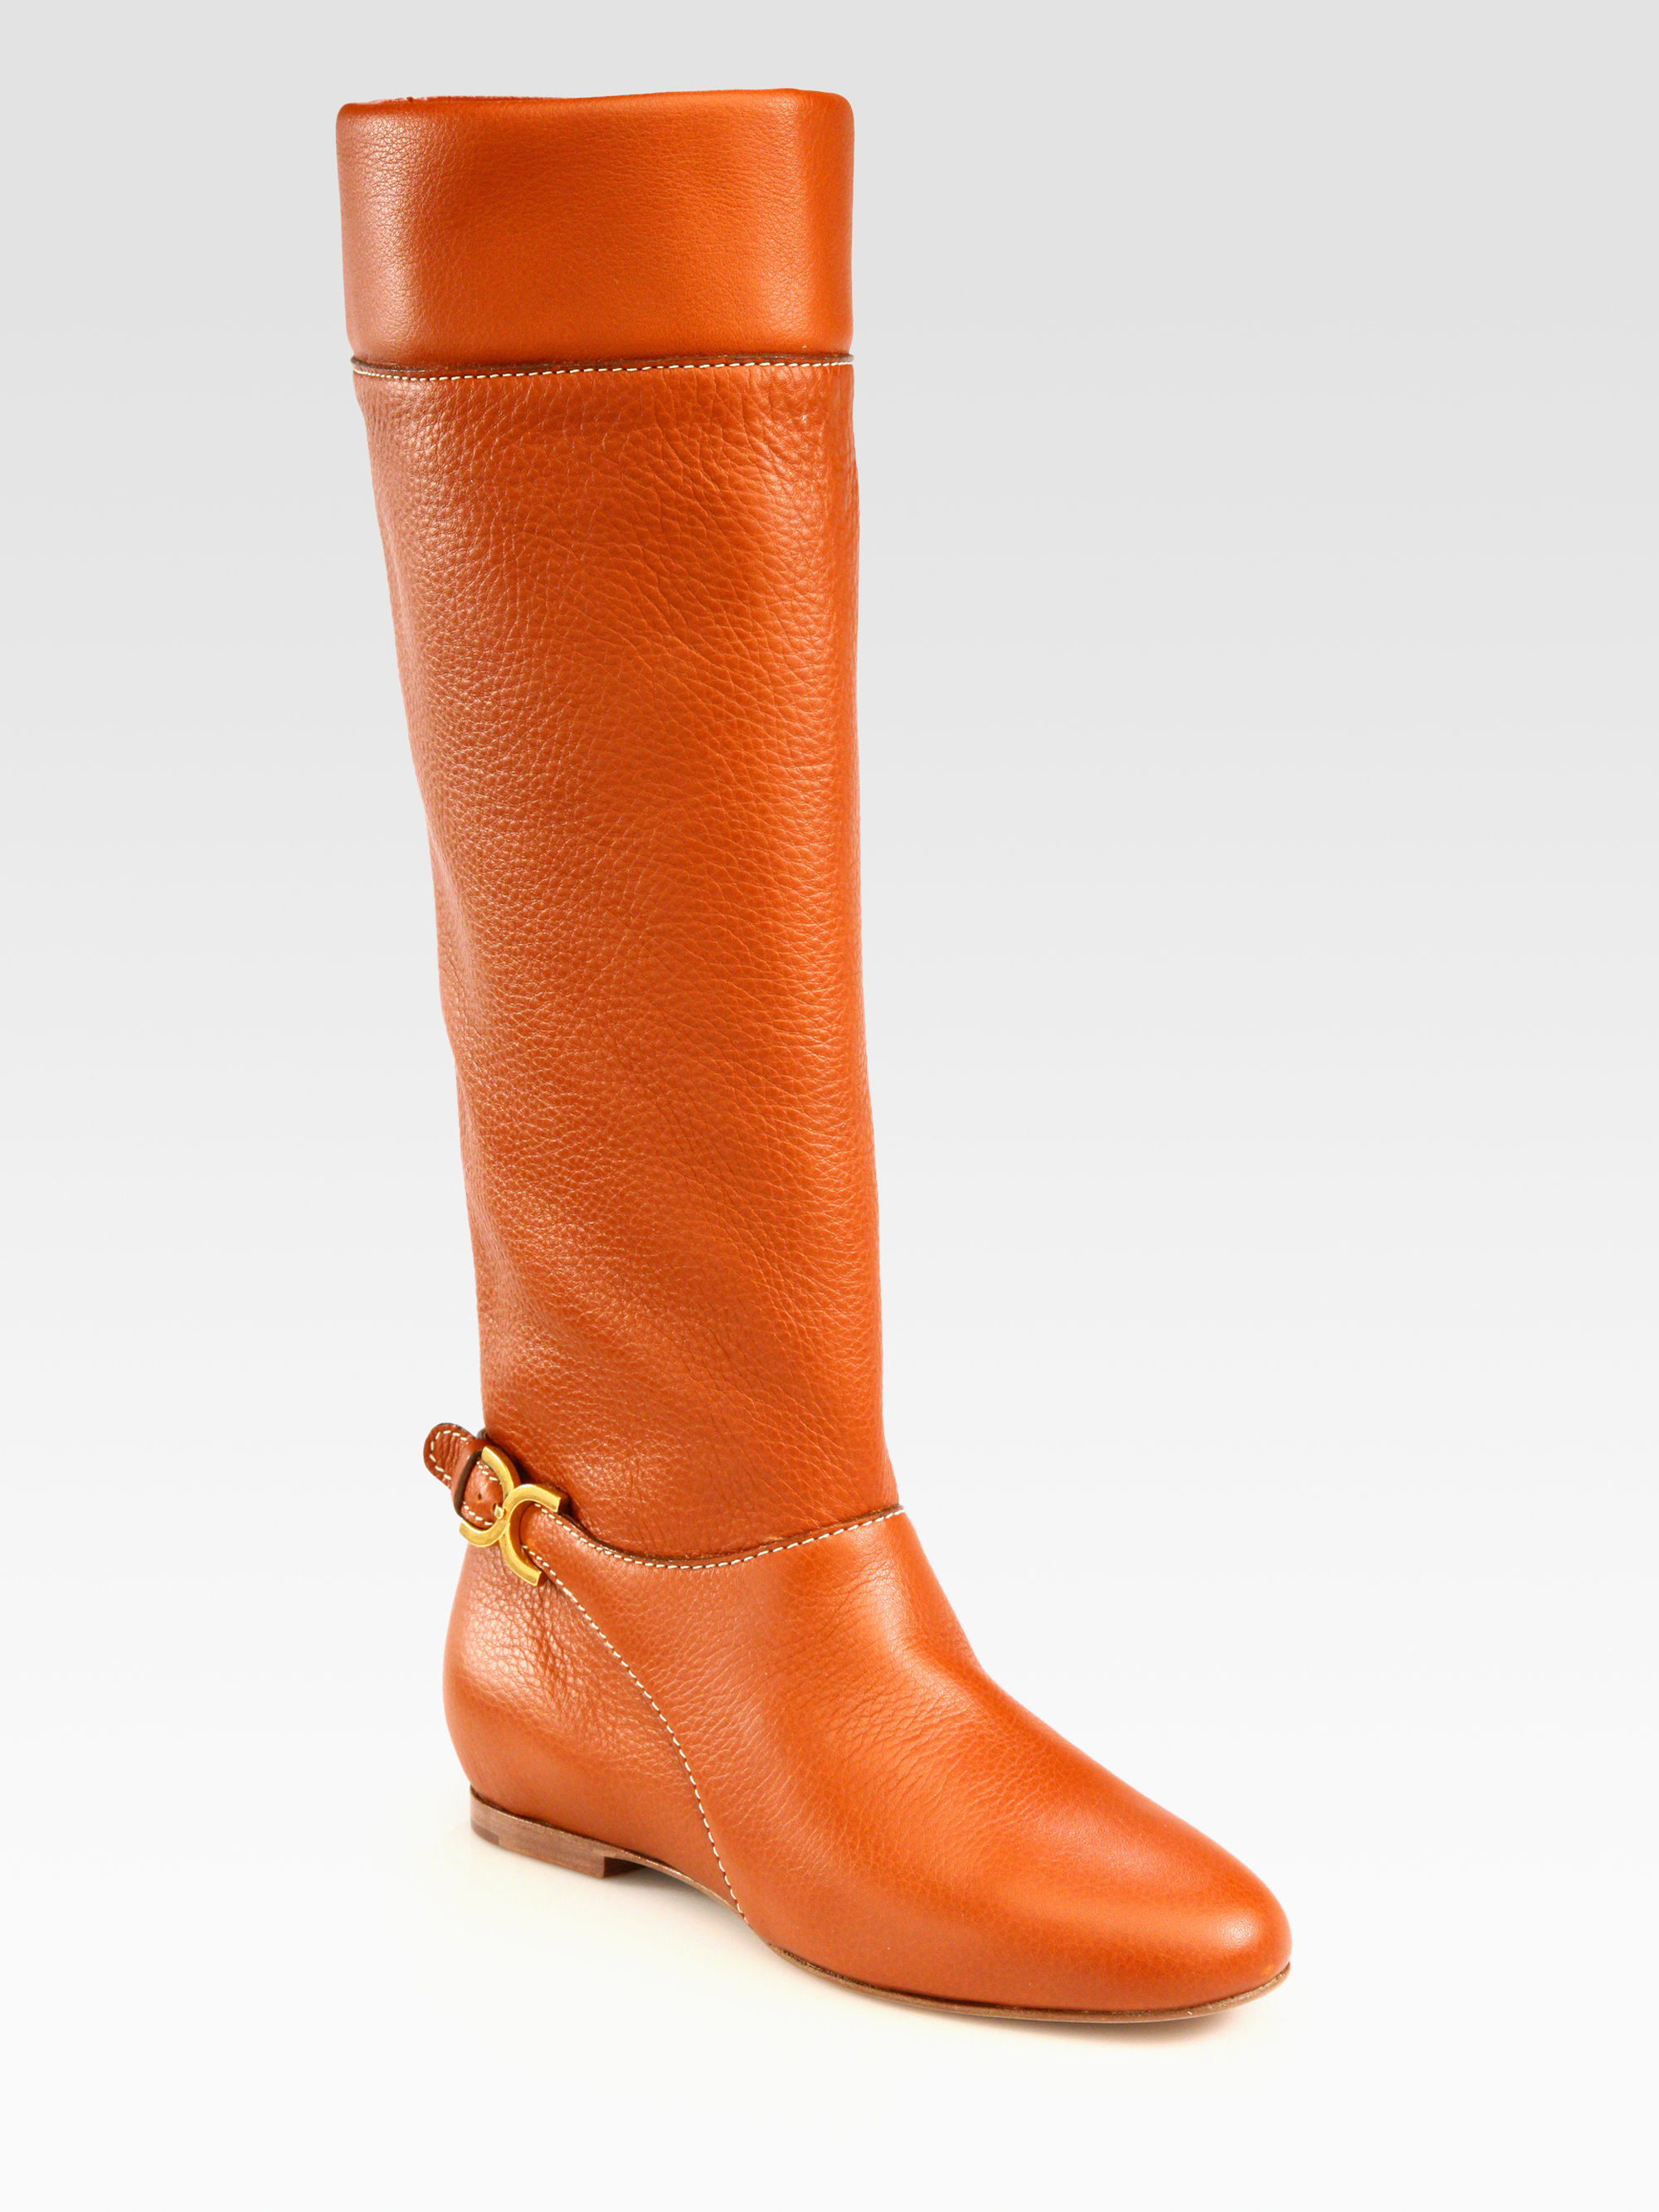 knee high boots tan leather